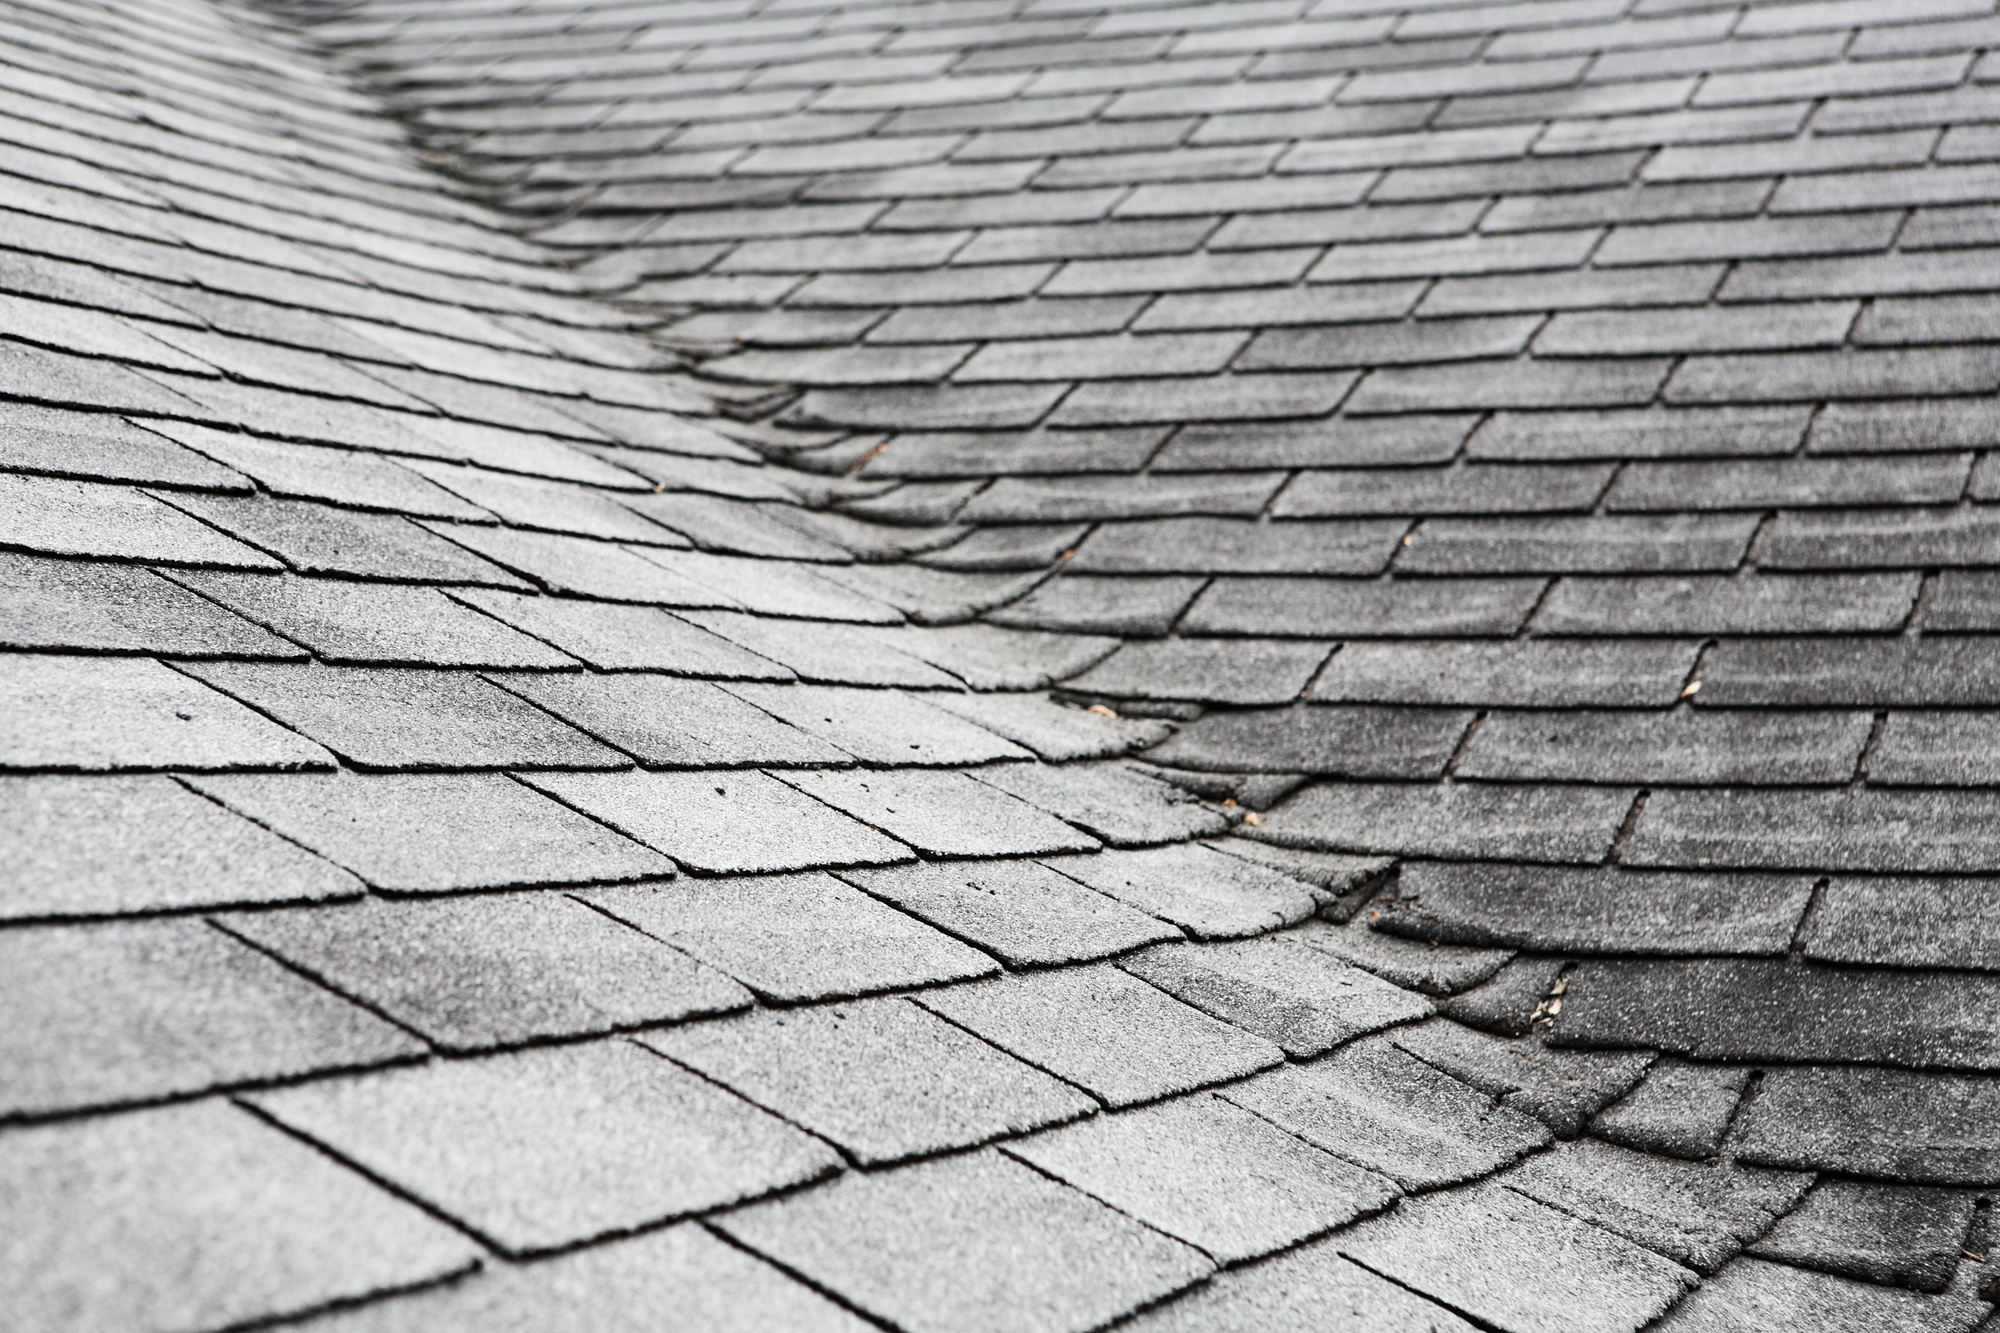 3 Tips for When You Call Roofing Contractors to Get a Timely Estimate